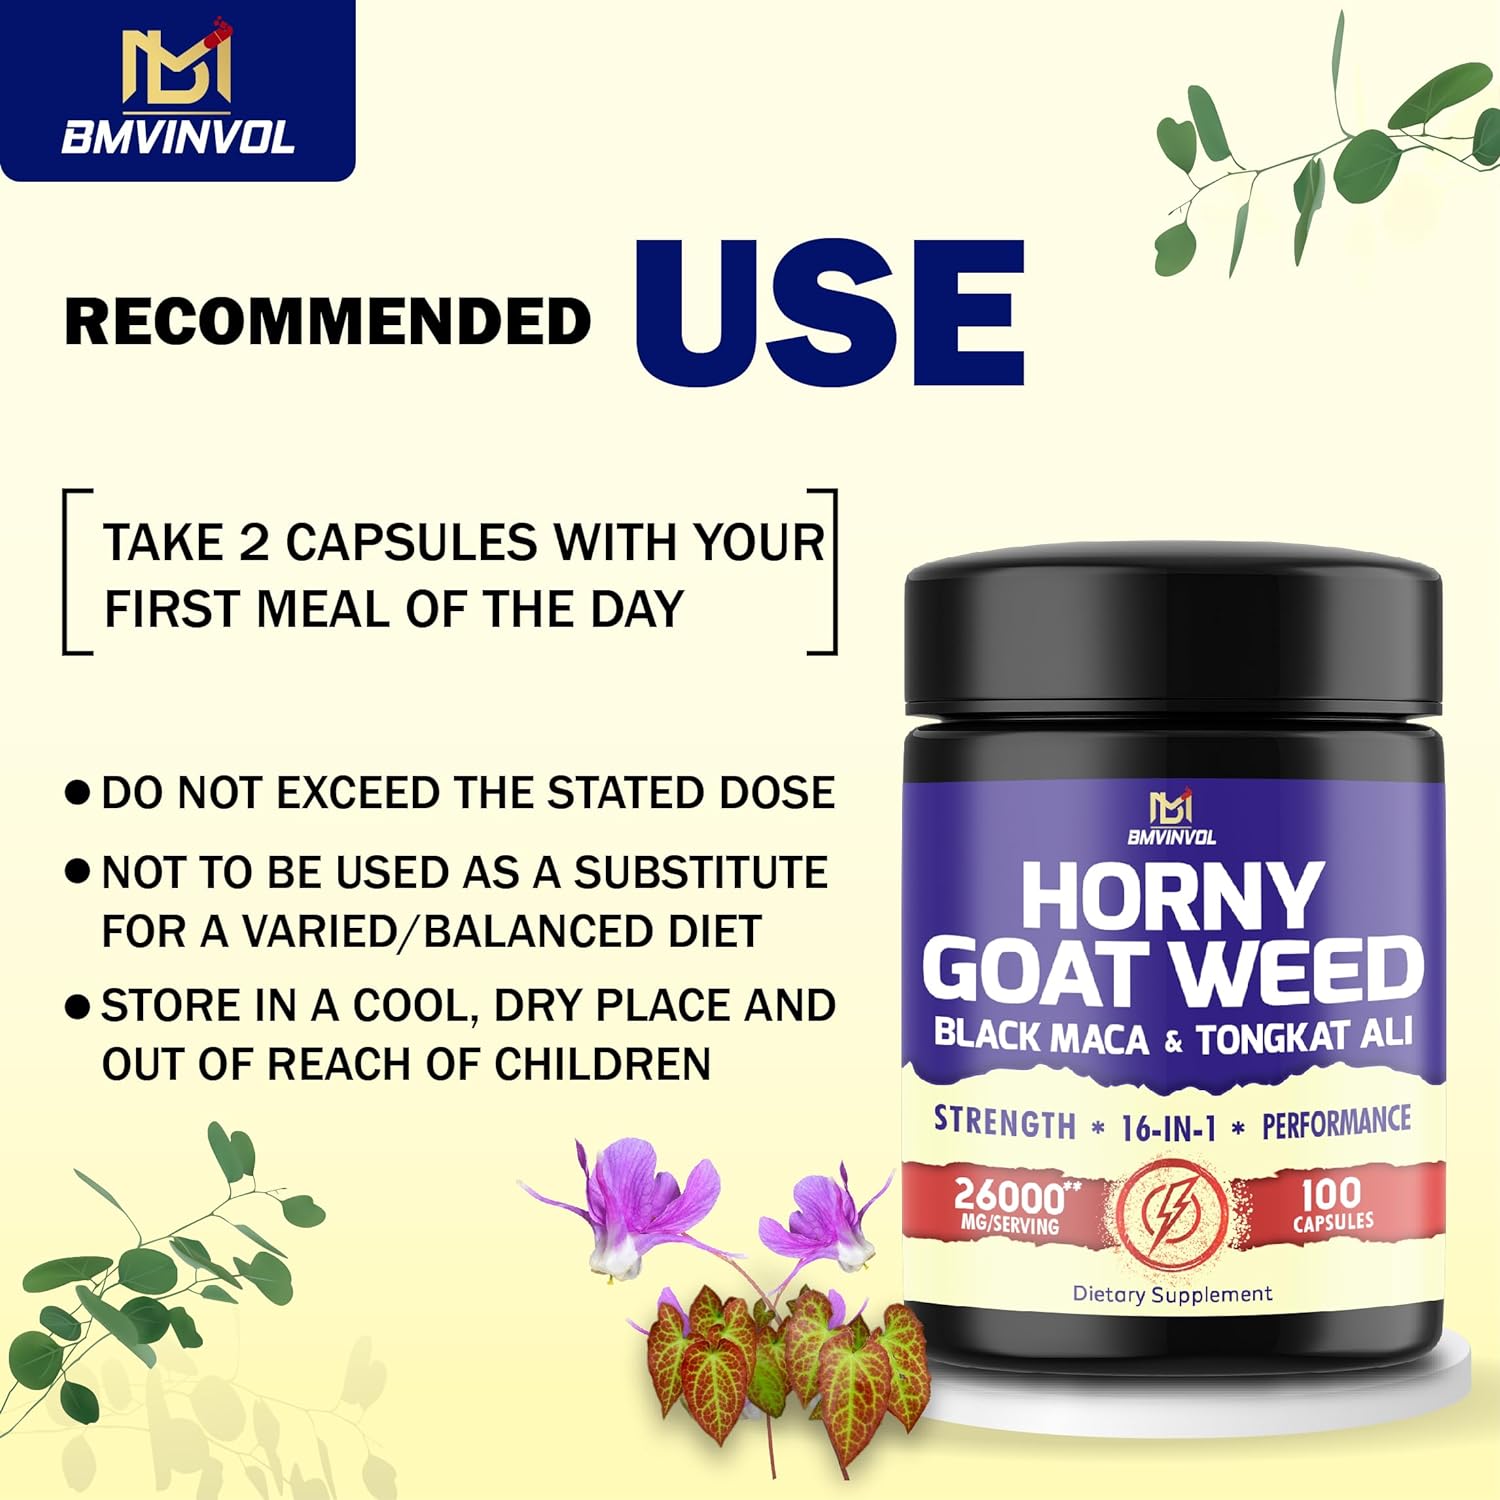 BMVINVOL 100 Capsules - Horny Goat Weed Supplement 26000mg with Black Maca, Tongkat Ali, Panax Ginseng, Ashwagandha & More - 16in1 Horny Goat Weed Capsules for Supports Performance and Energy Levels : Health & Household